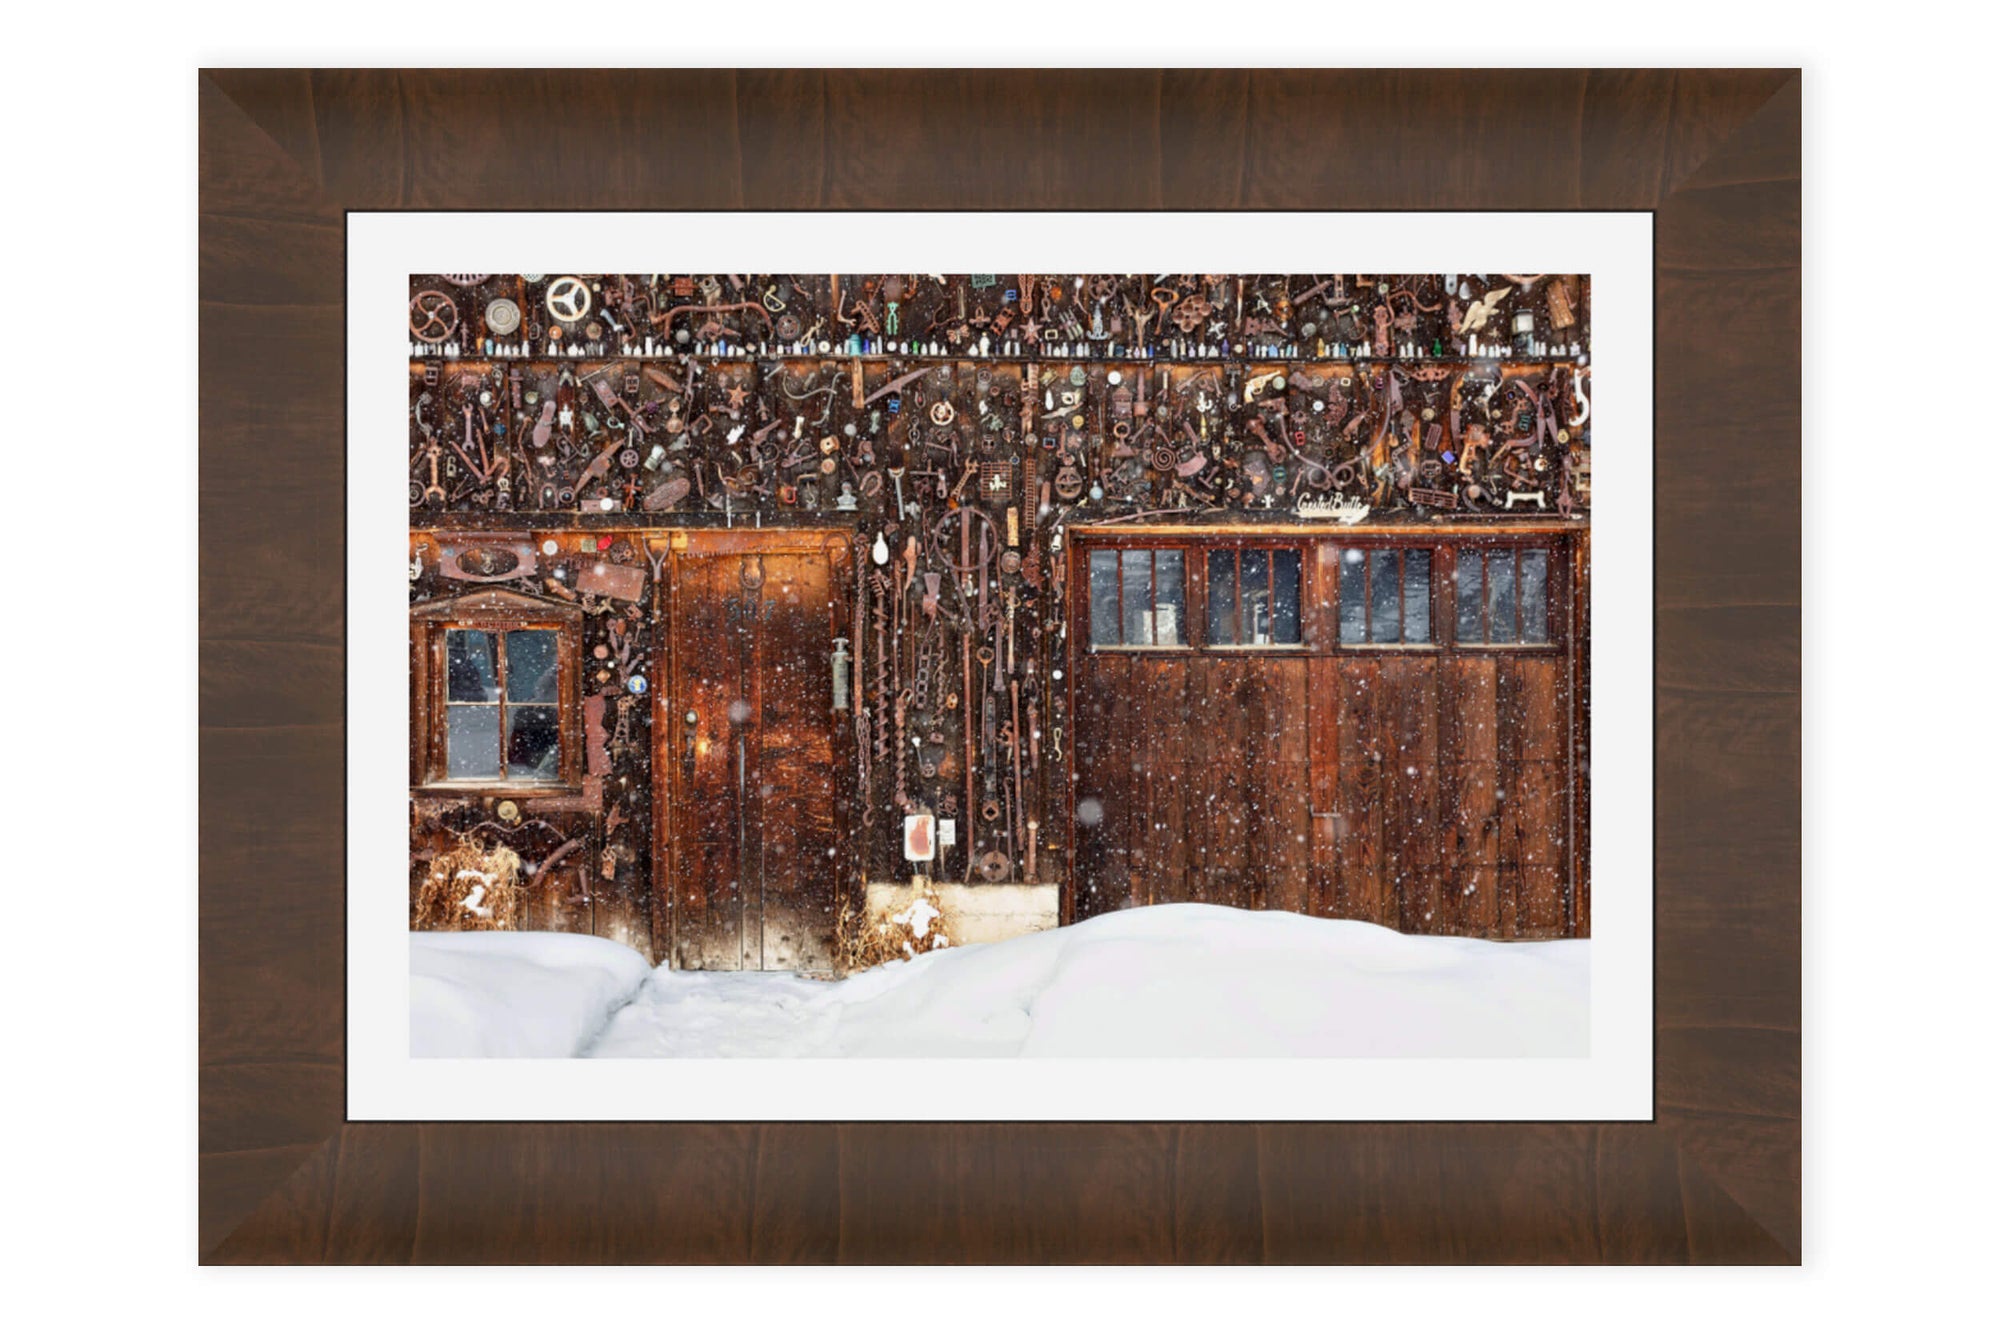 A framed Crested Butte picture of a snowed-in cabin in winter.